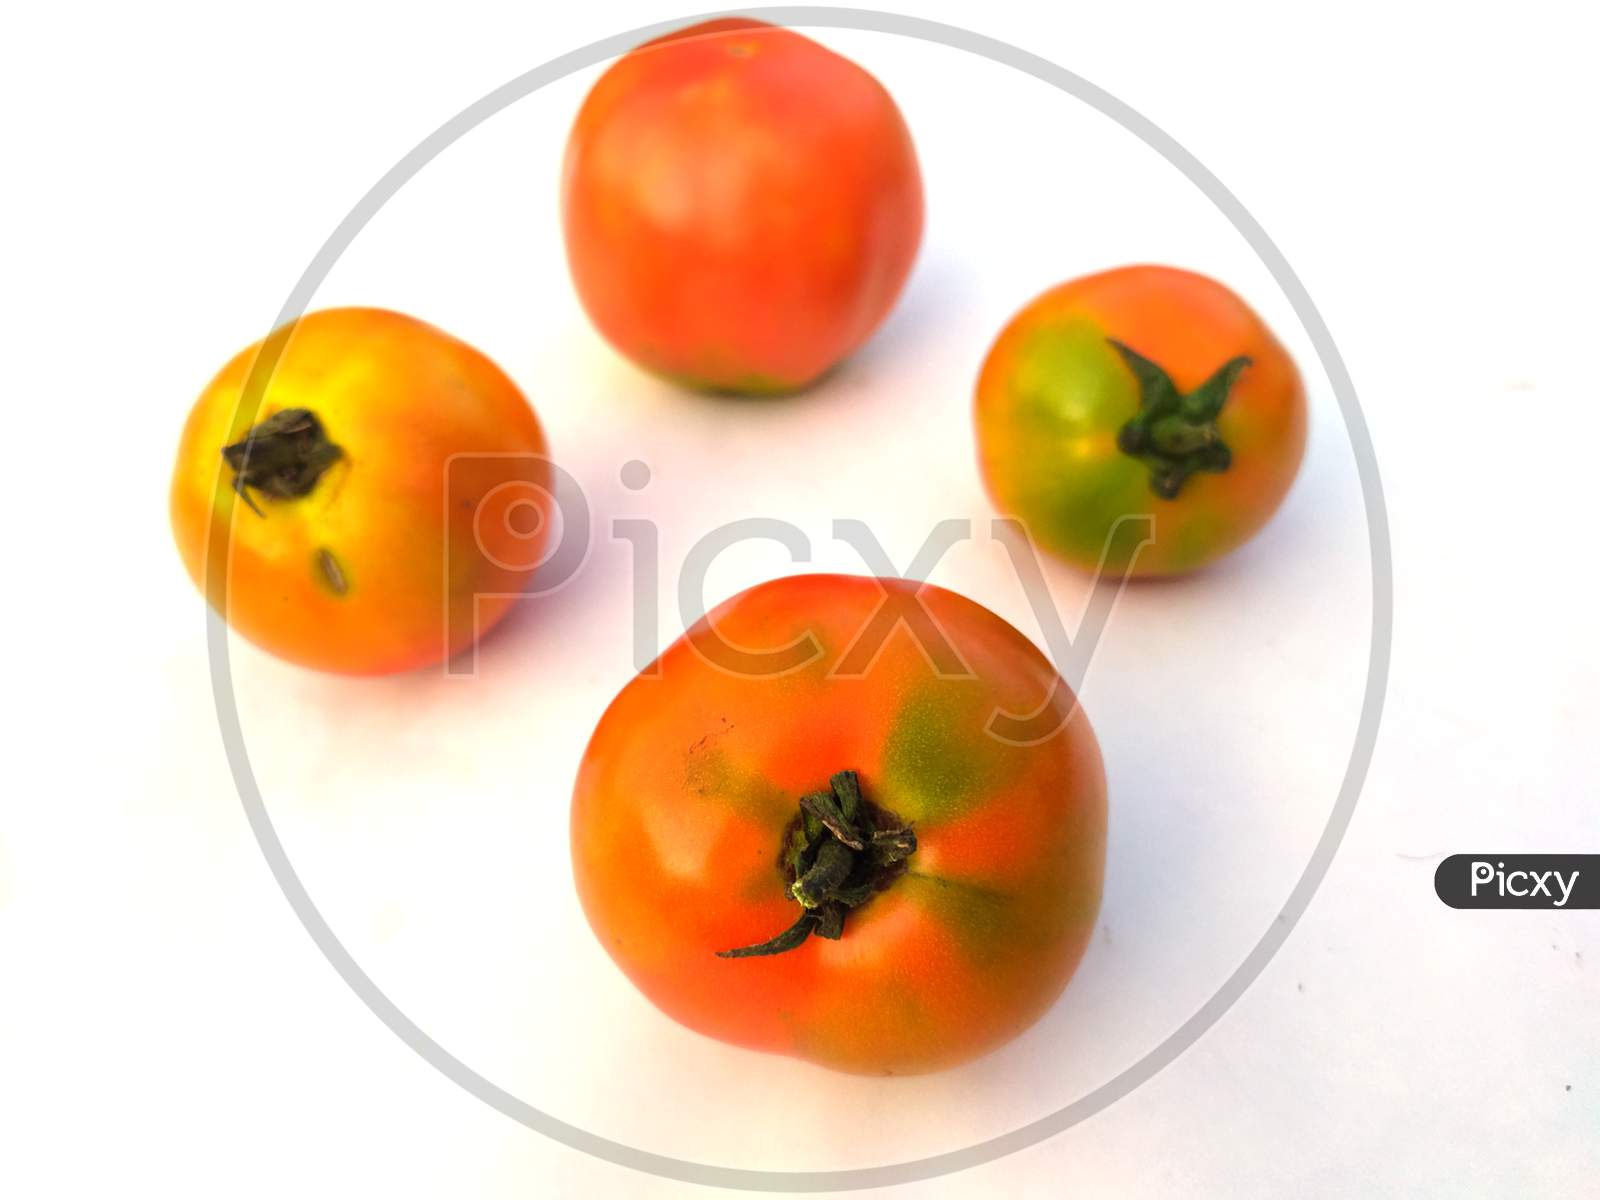 some fresh red tomato isolated on white background